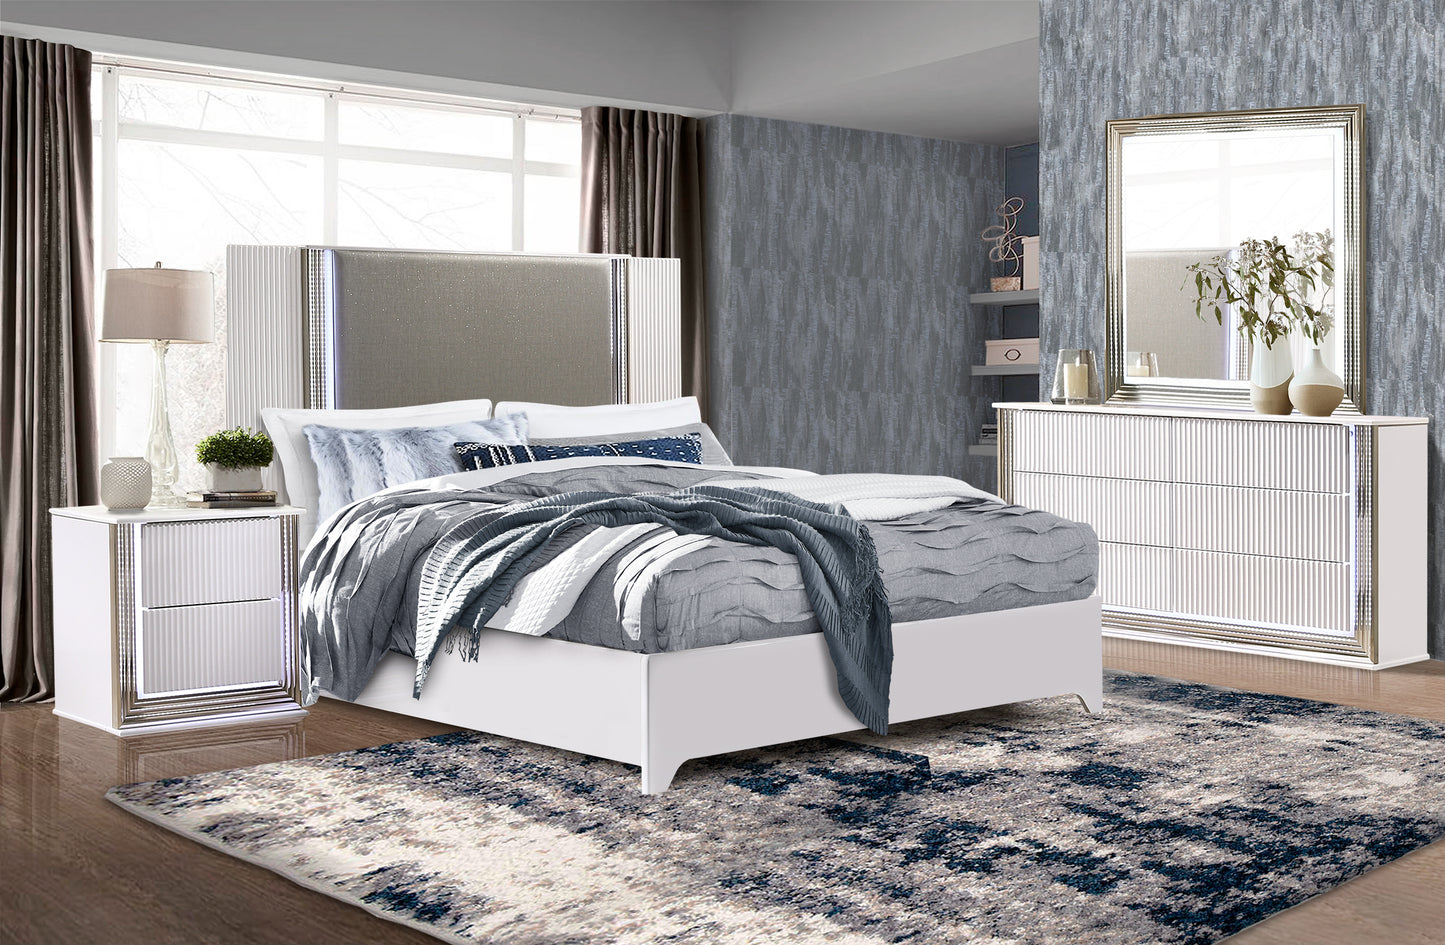 King Bedroom Set Clearance & Discounts